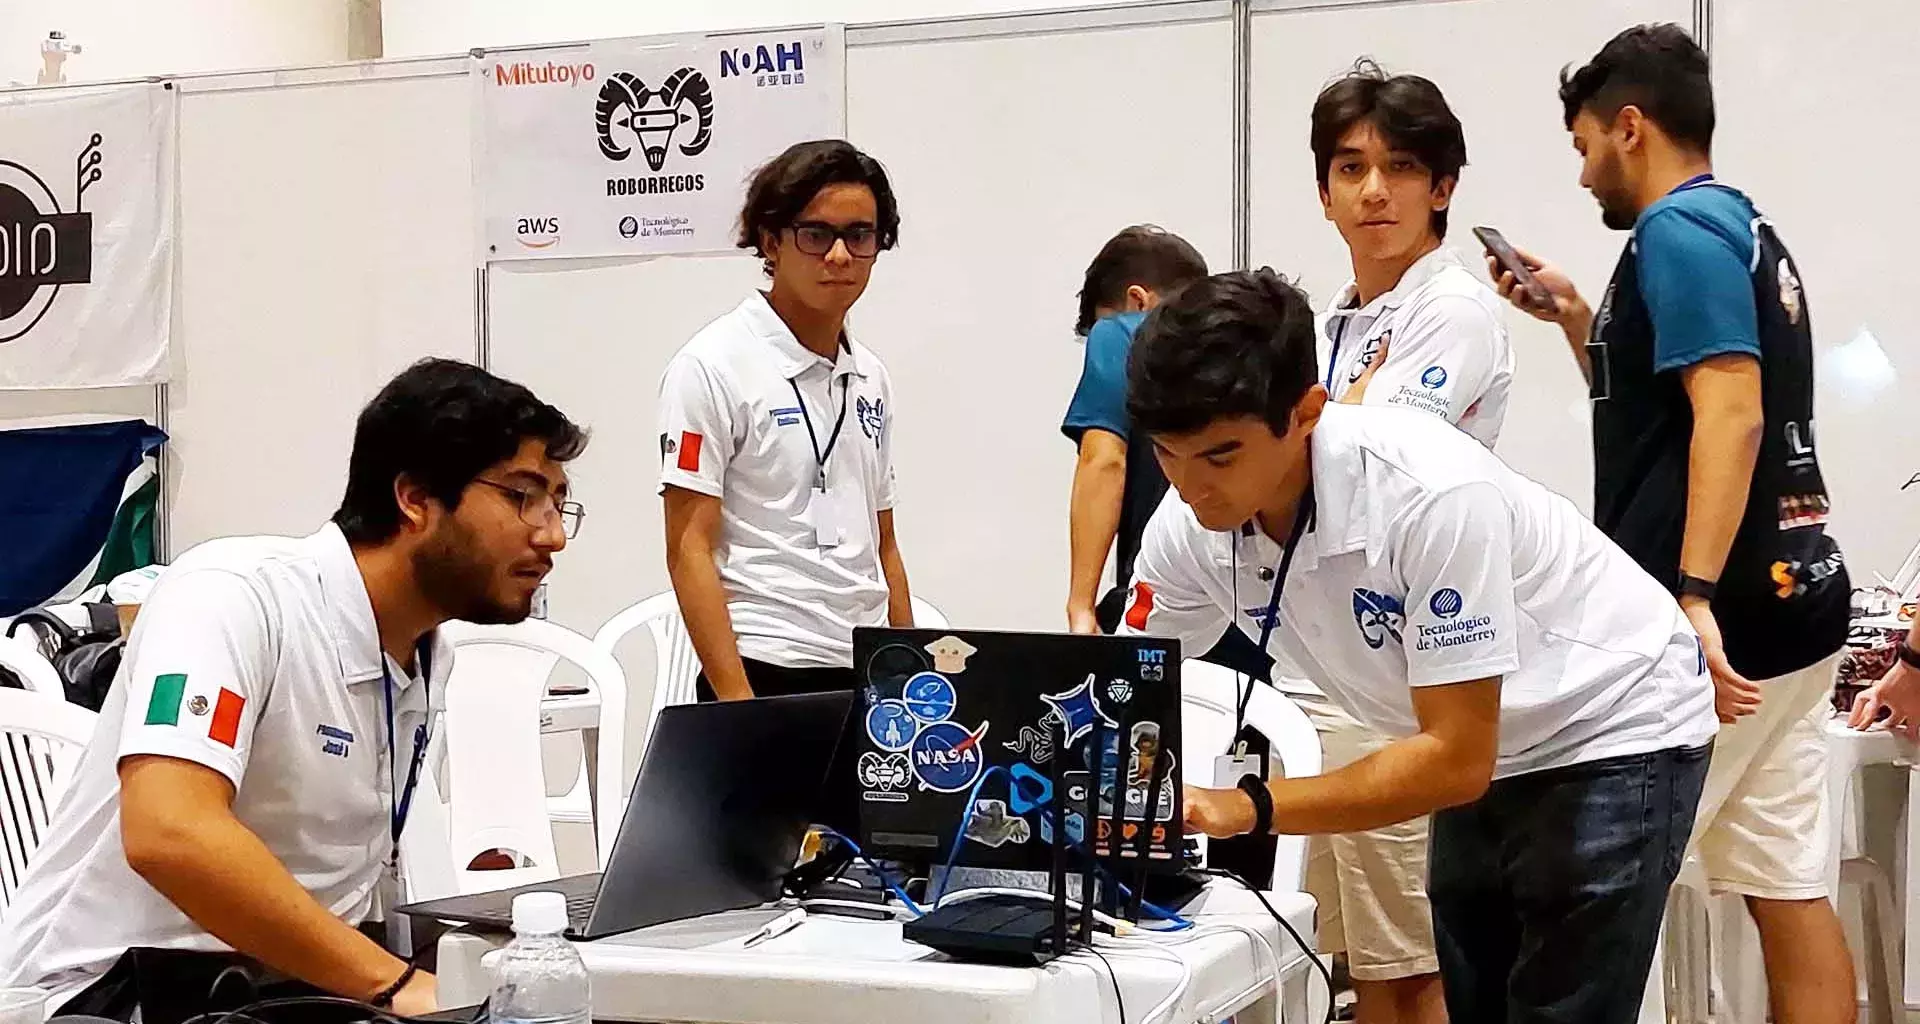 Repeated feat: Tec robotics team comes first in Brazilian competition